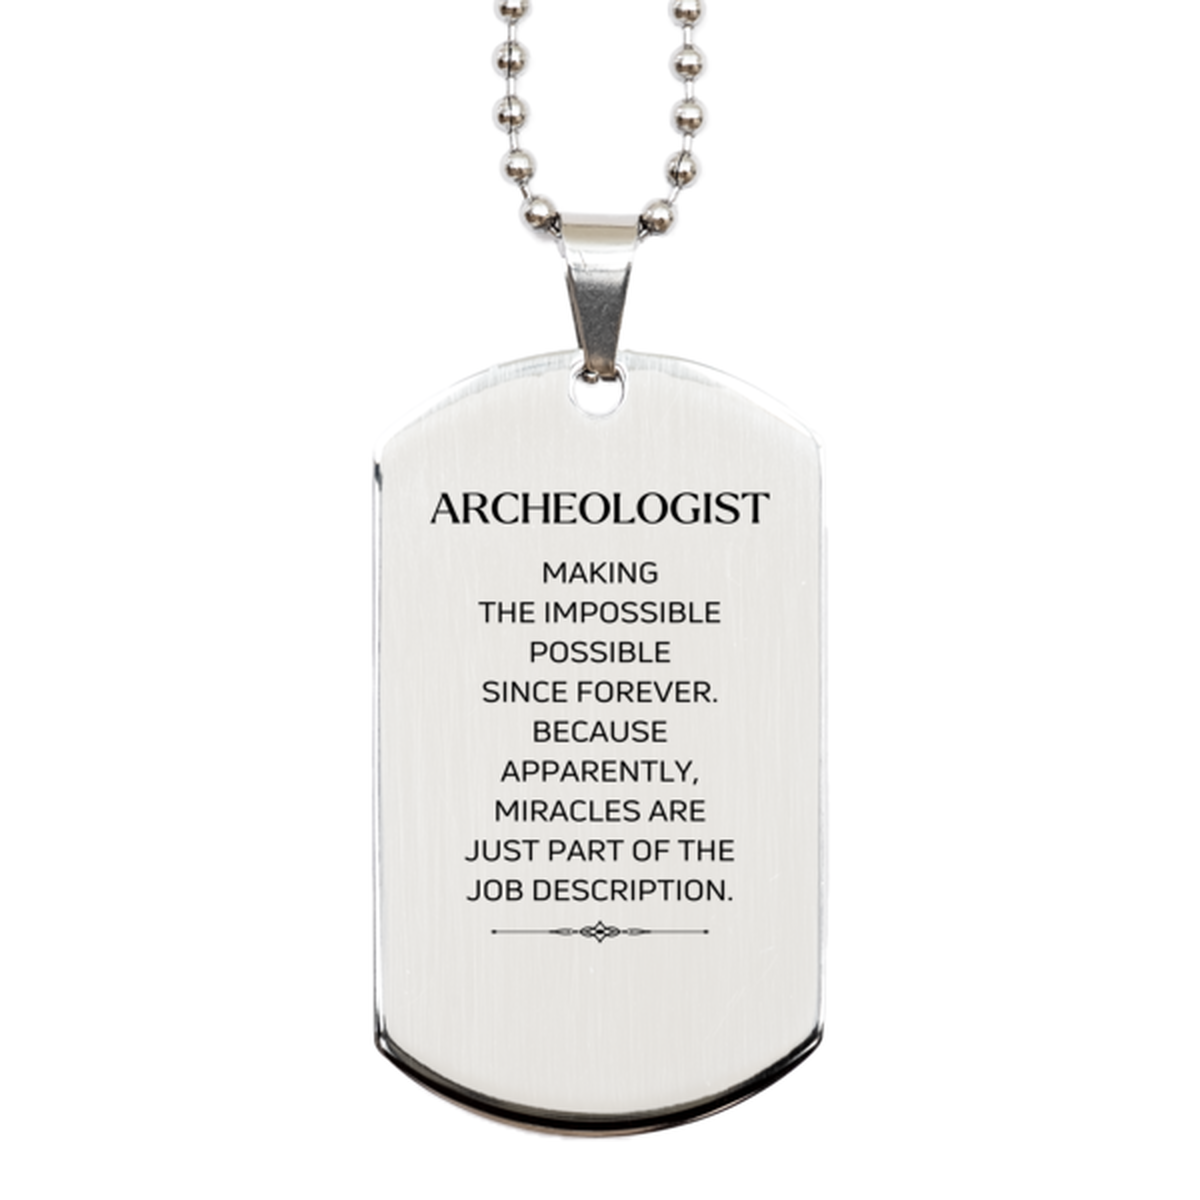 Funny Archeologist Gifts, Miracles are just part of the job description, Inspirational Birthday Silver Dog Tag For Archeologist, Men, Women, Coworkers, Friends, Boss